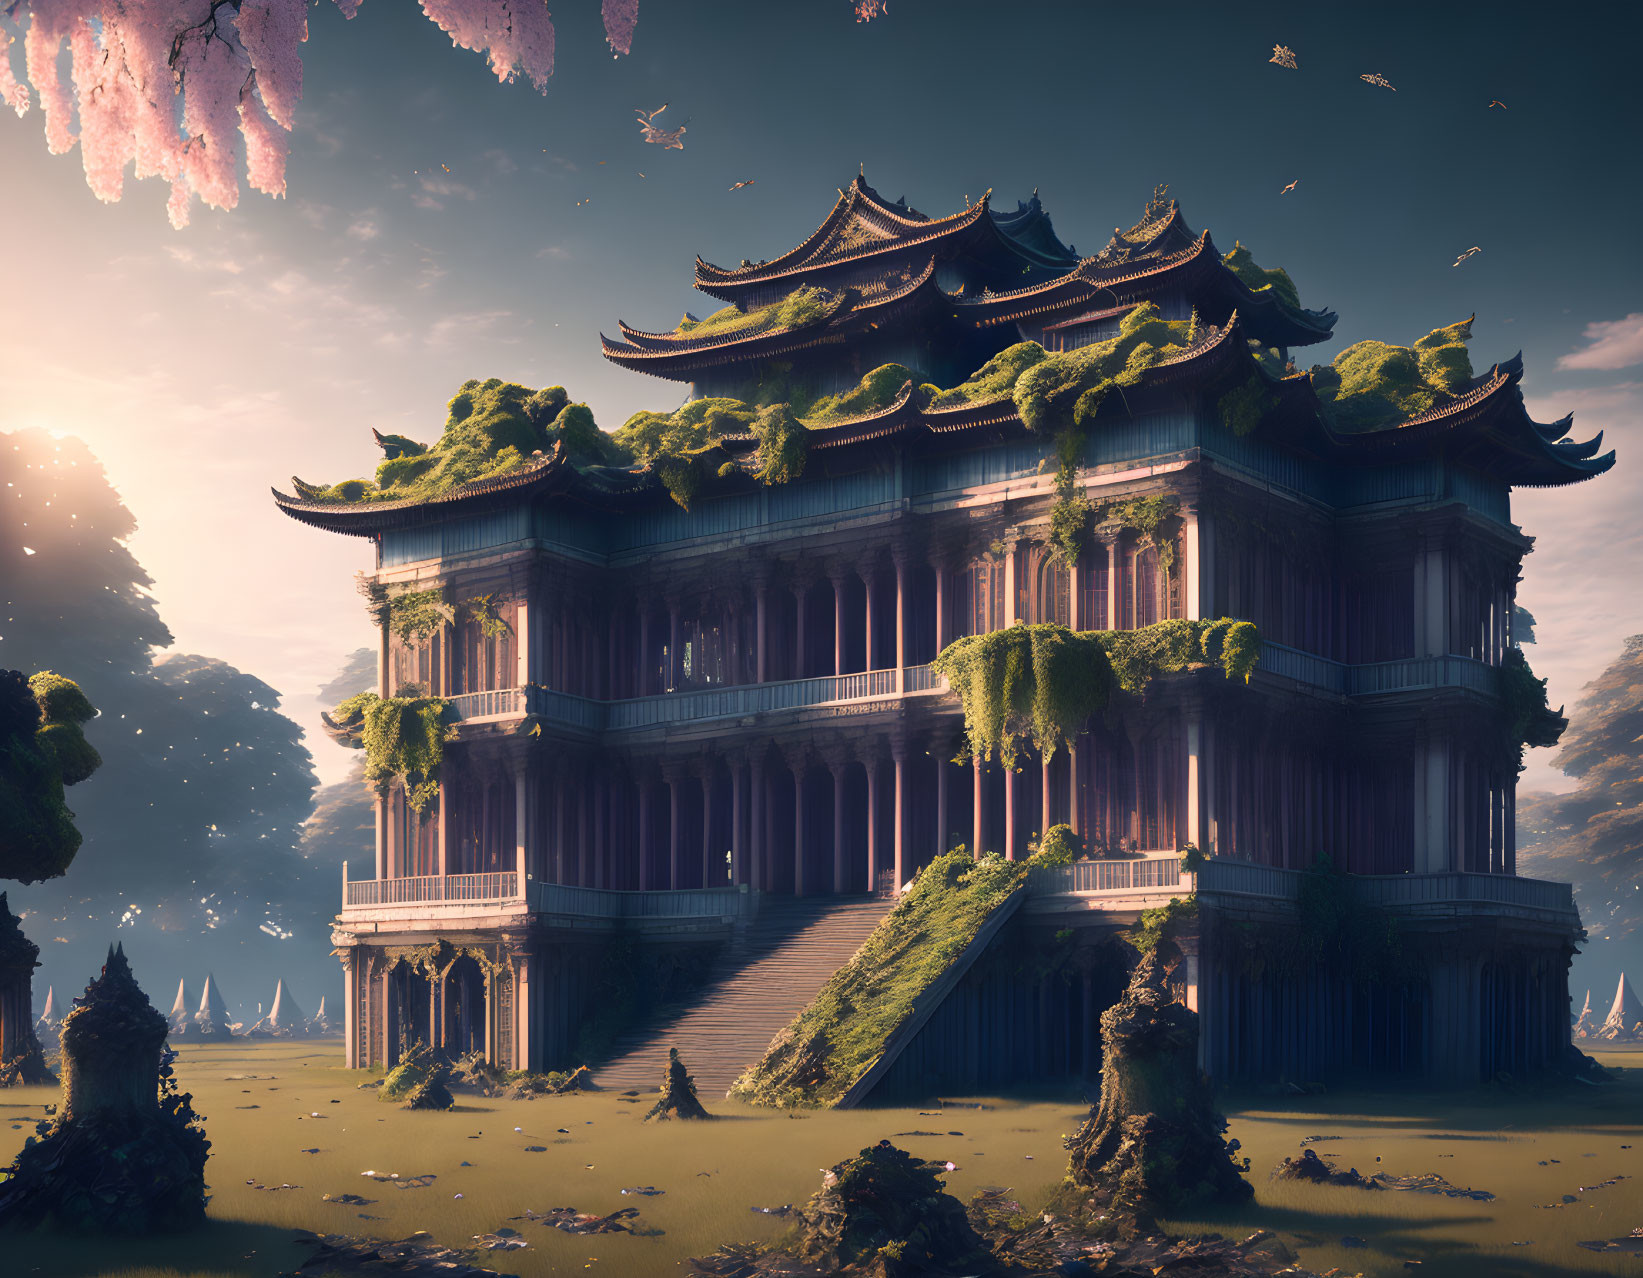 Ornate Asian-style palace in mystical setting with cherry blossoms